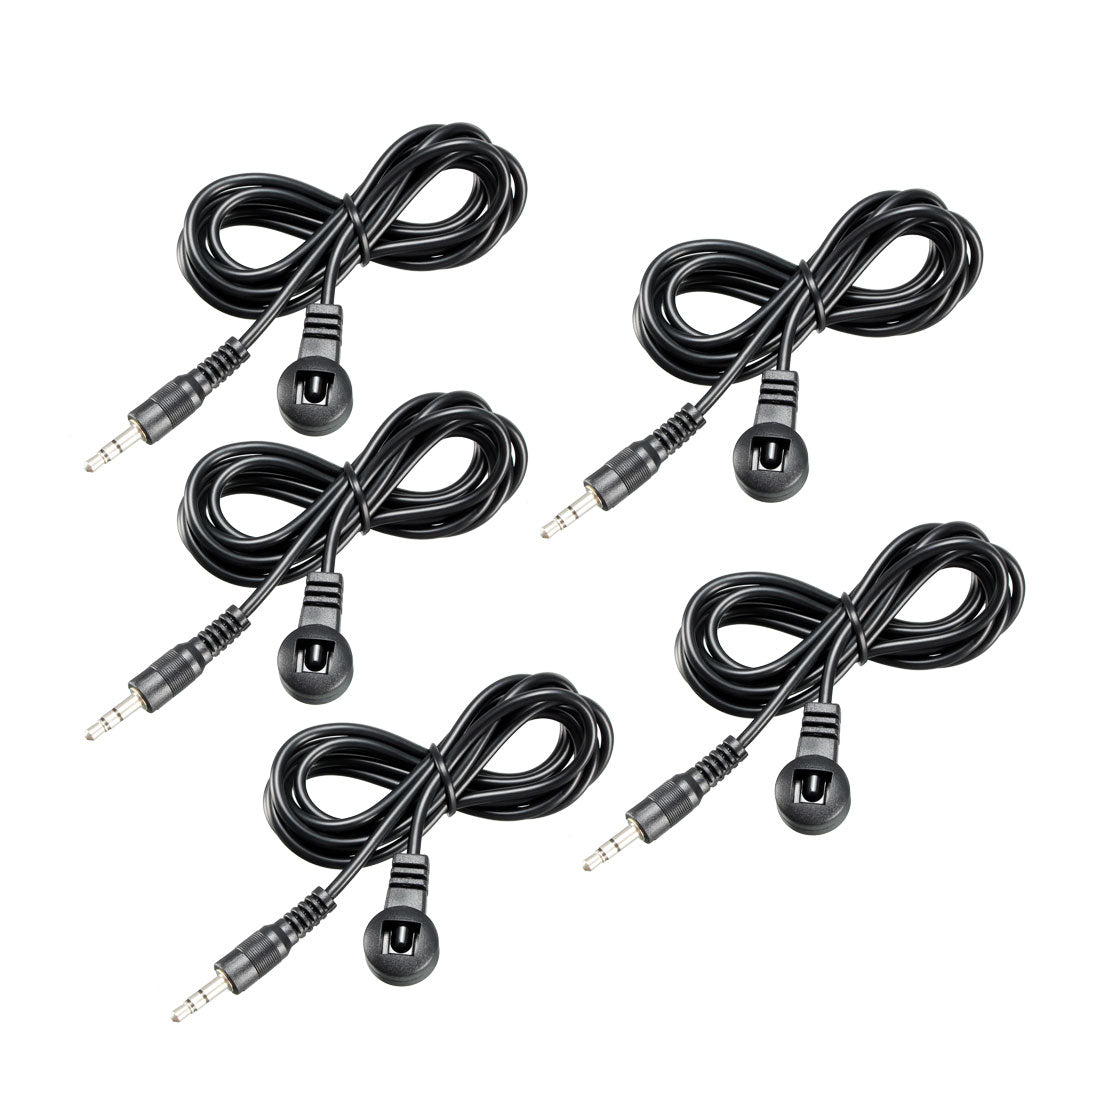 uxcell Uxcell IR Infrared Receiver Extender Cable 3.5mm Jack 4.9FT Long 26-39FT Receiving Distance Black Head 5pcs